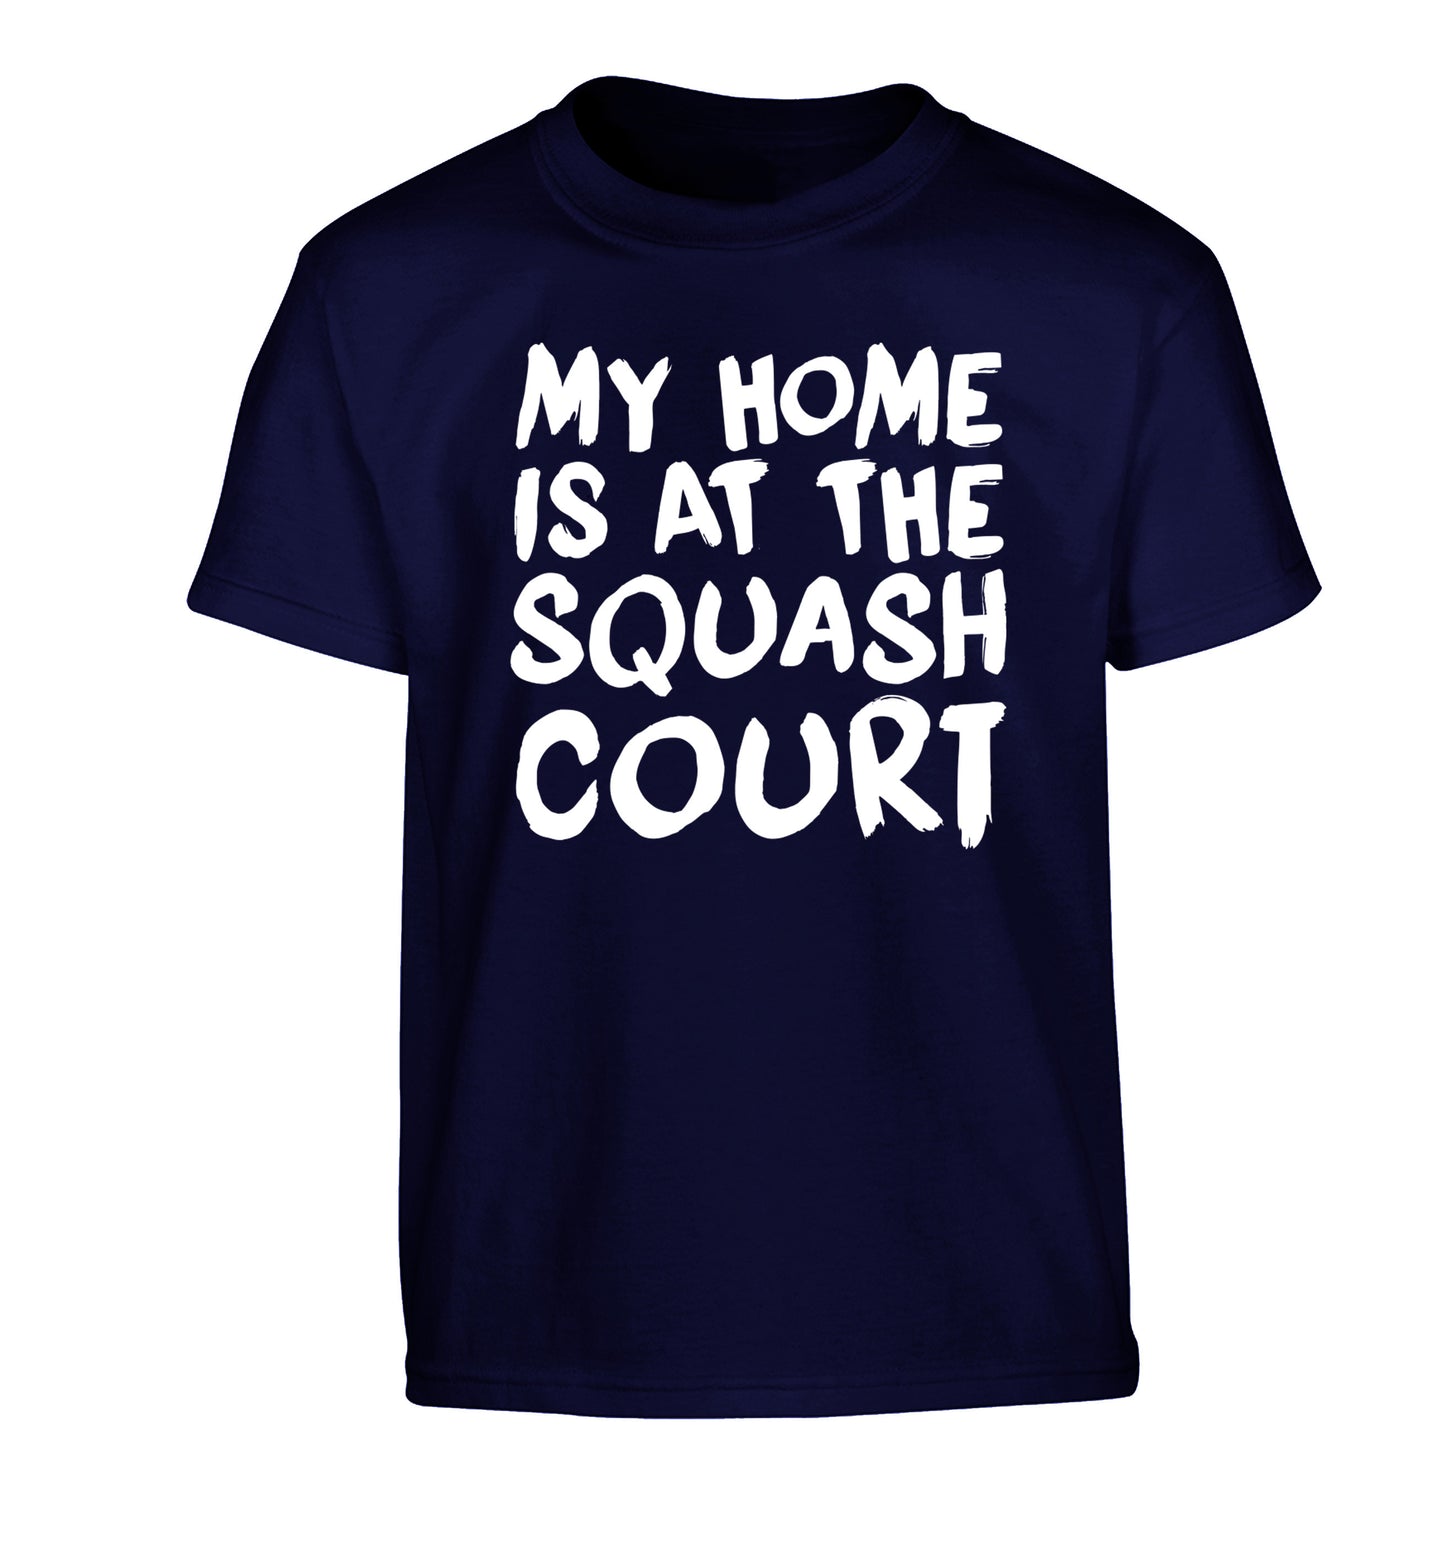 My home is at the squash court Children's navy Tshirt 12-14 Years